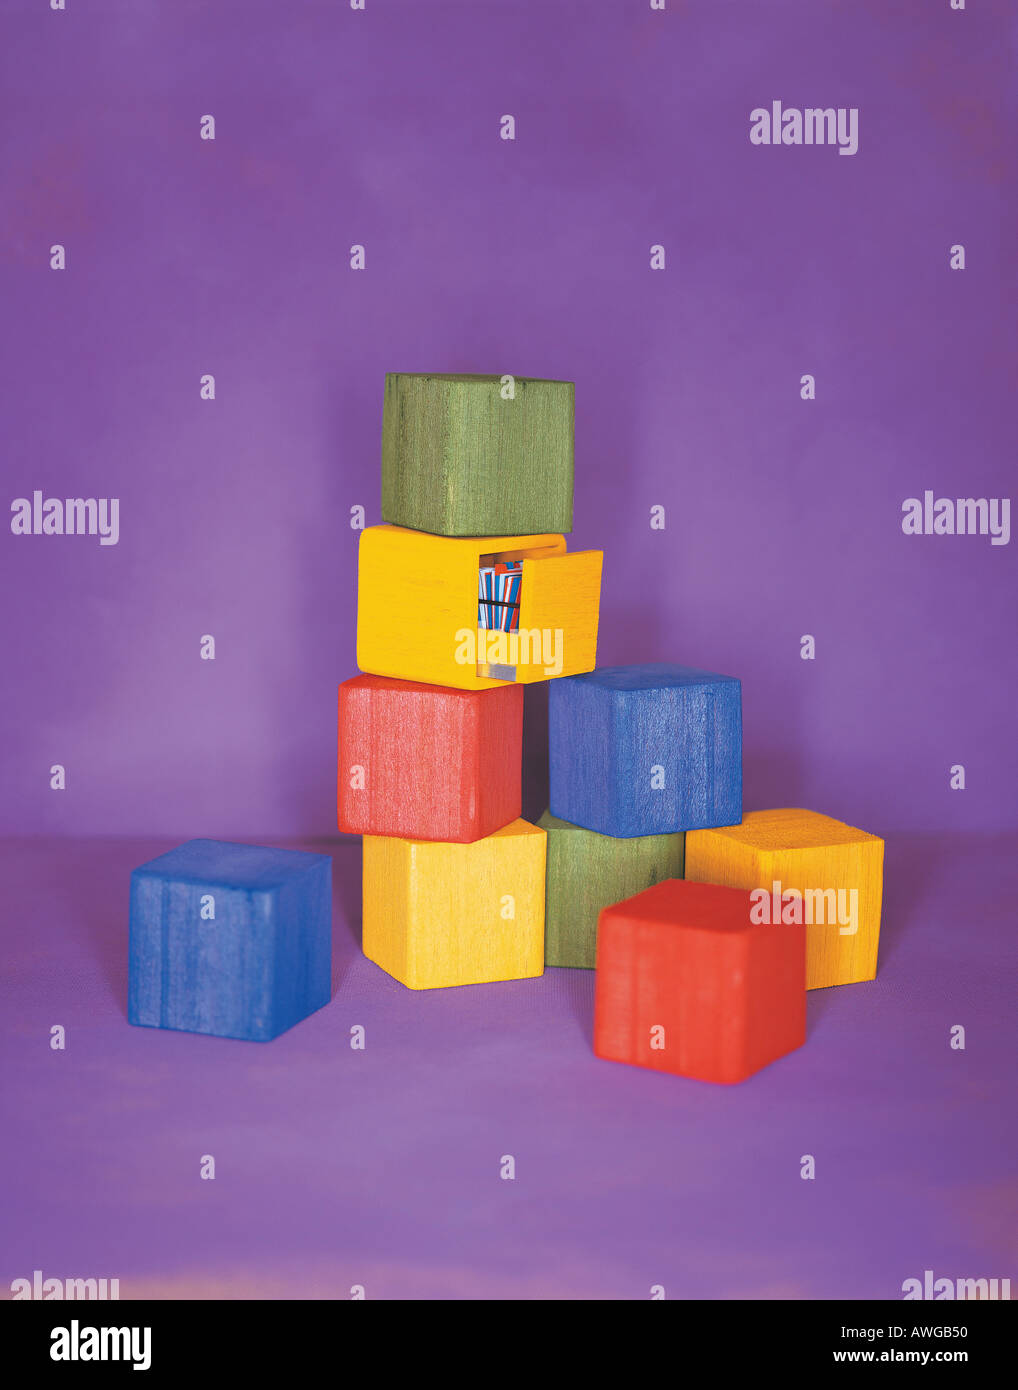 Children s building blocks stacked in a pile Stock Photo